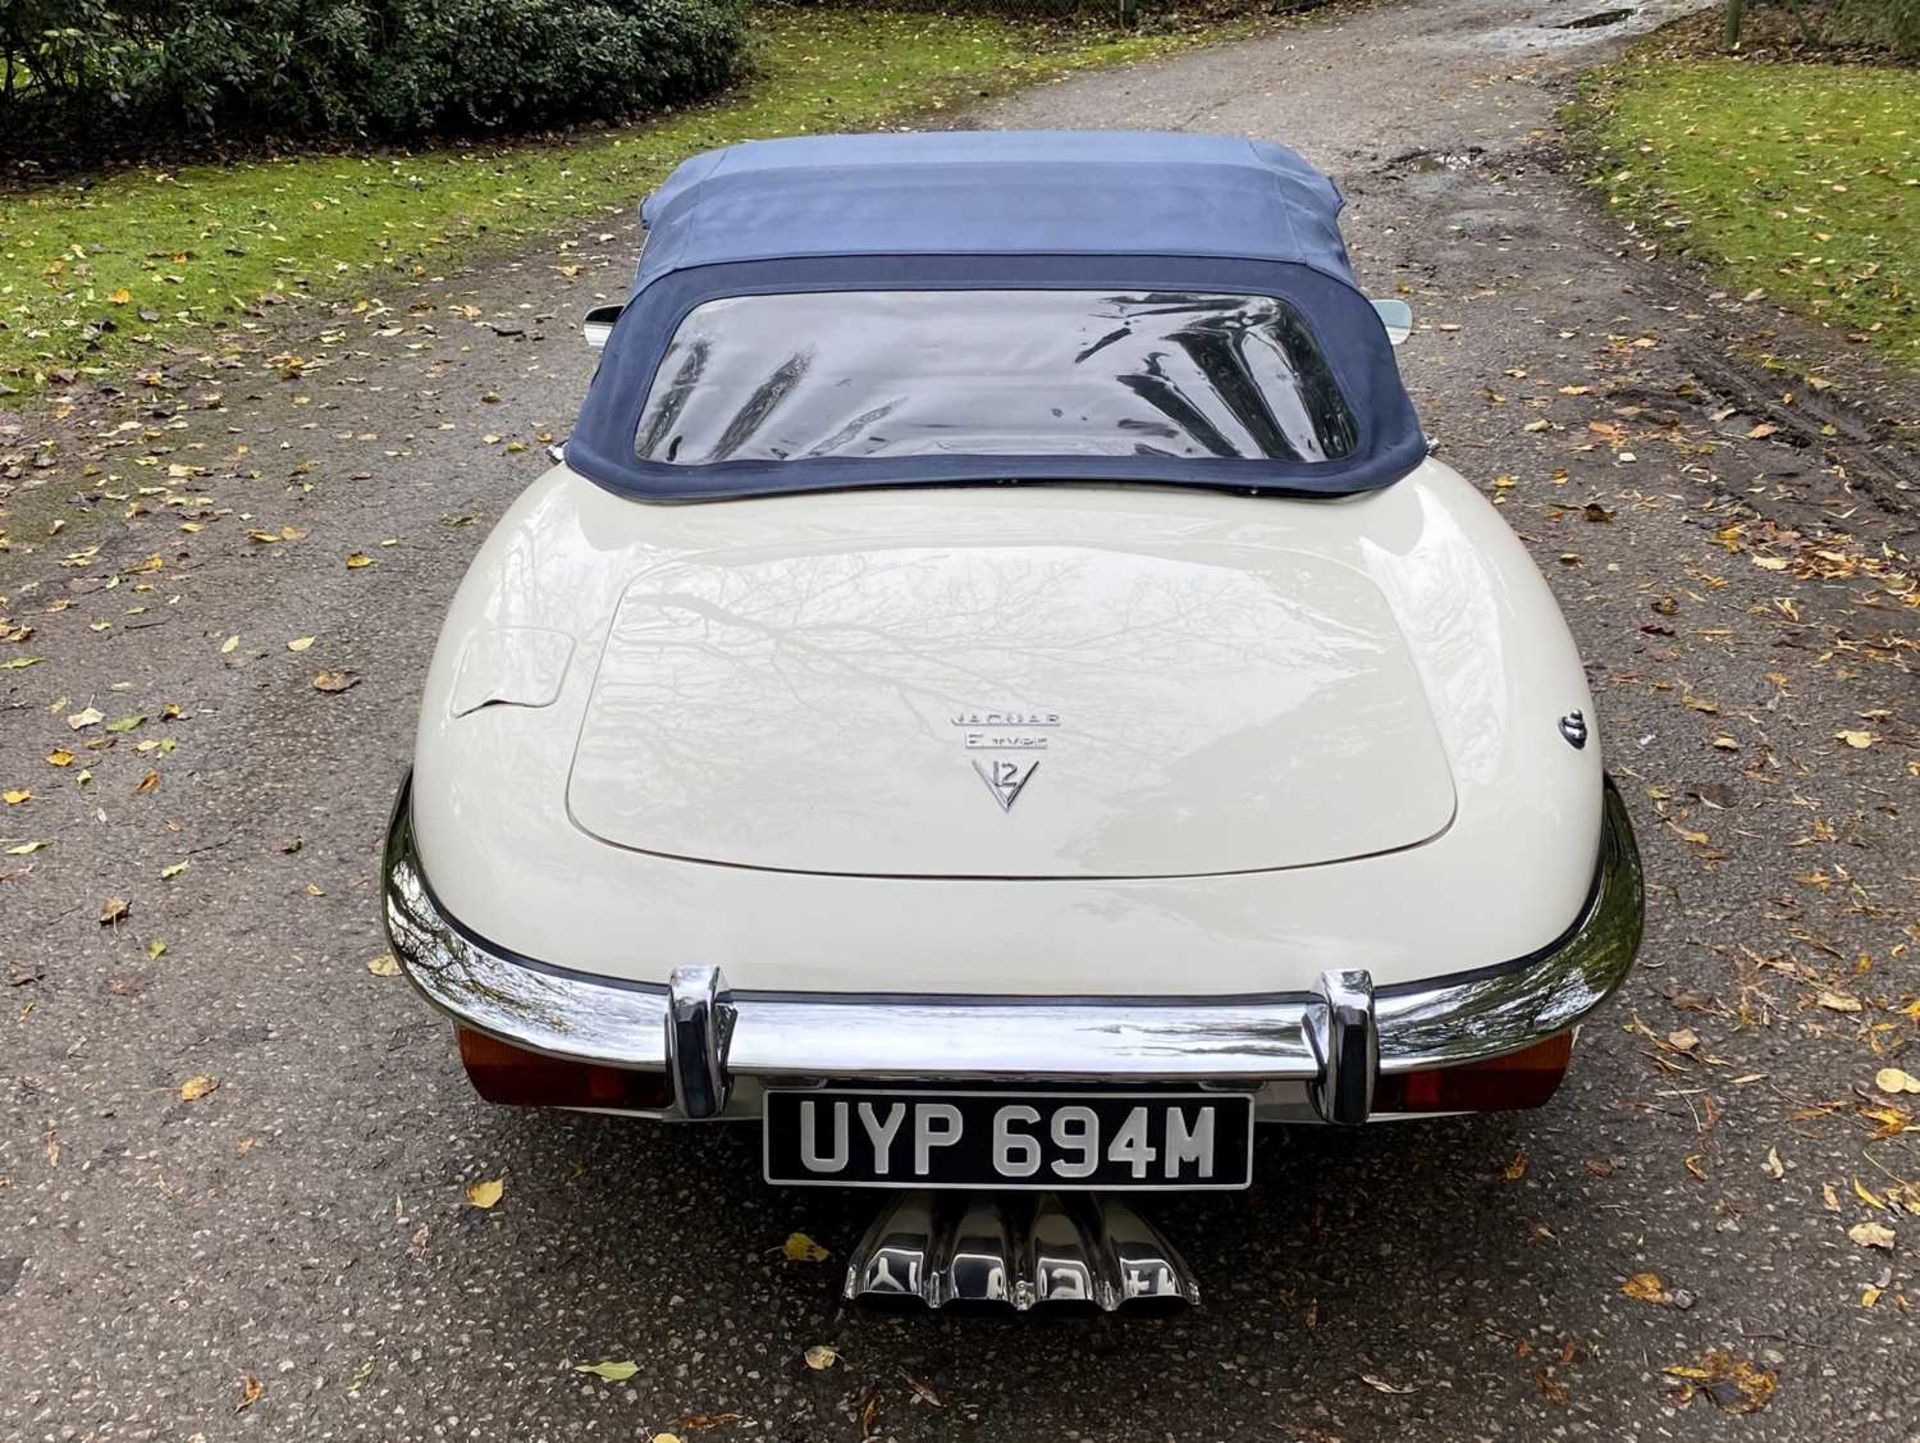 1973 Jaguar E-Type V12 Roadster As seen in Only Fools and Horses - Image 31 of 105